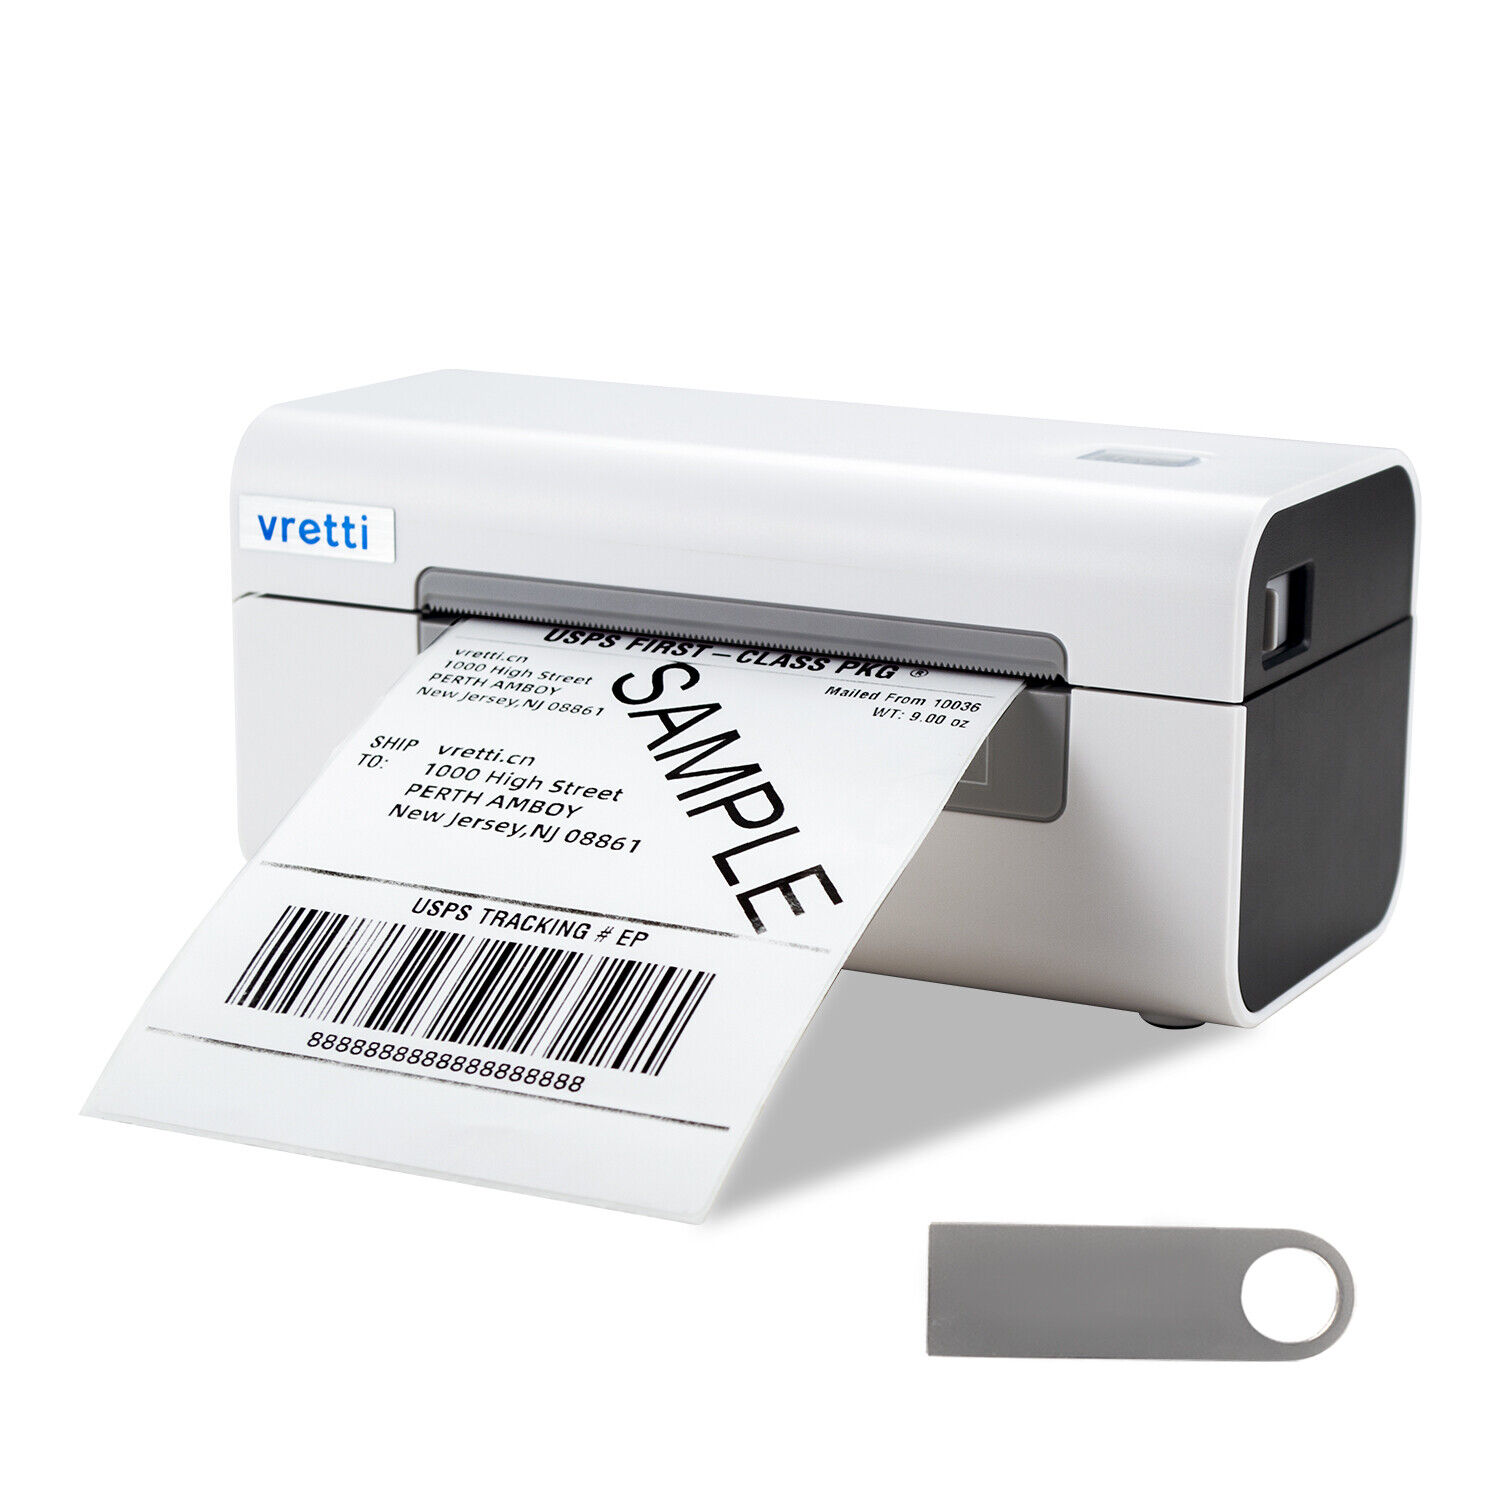 VRETTI Label Printer USB Thermal Printer for Shipping USPS UPS FedEx eBay Etsy. Available Now for 76.99